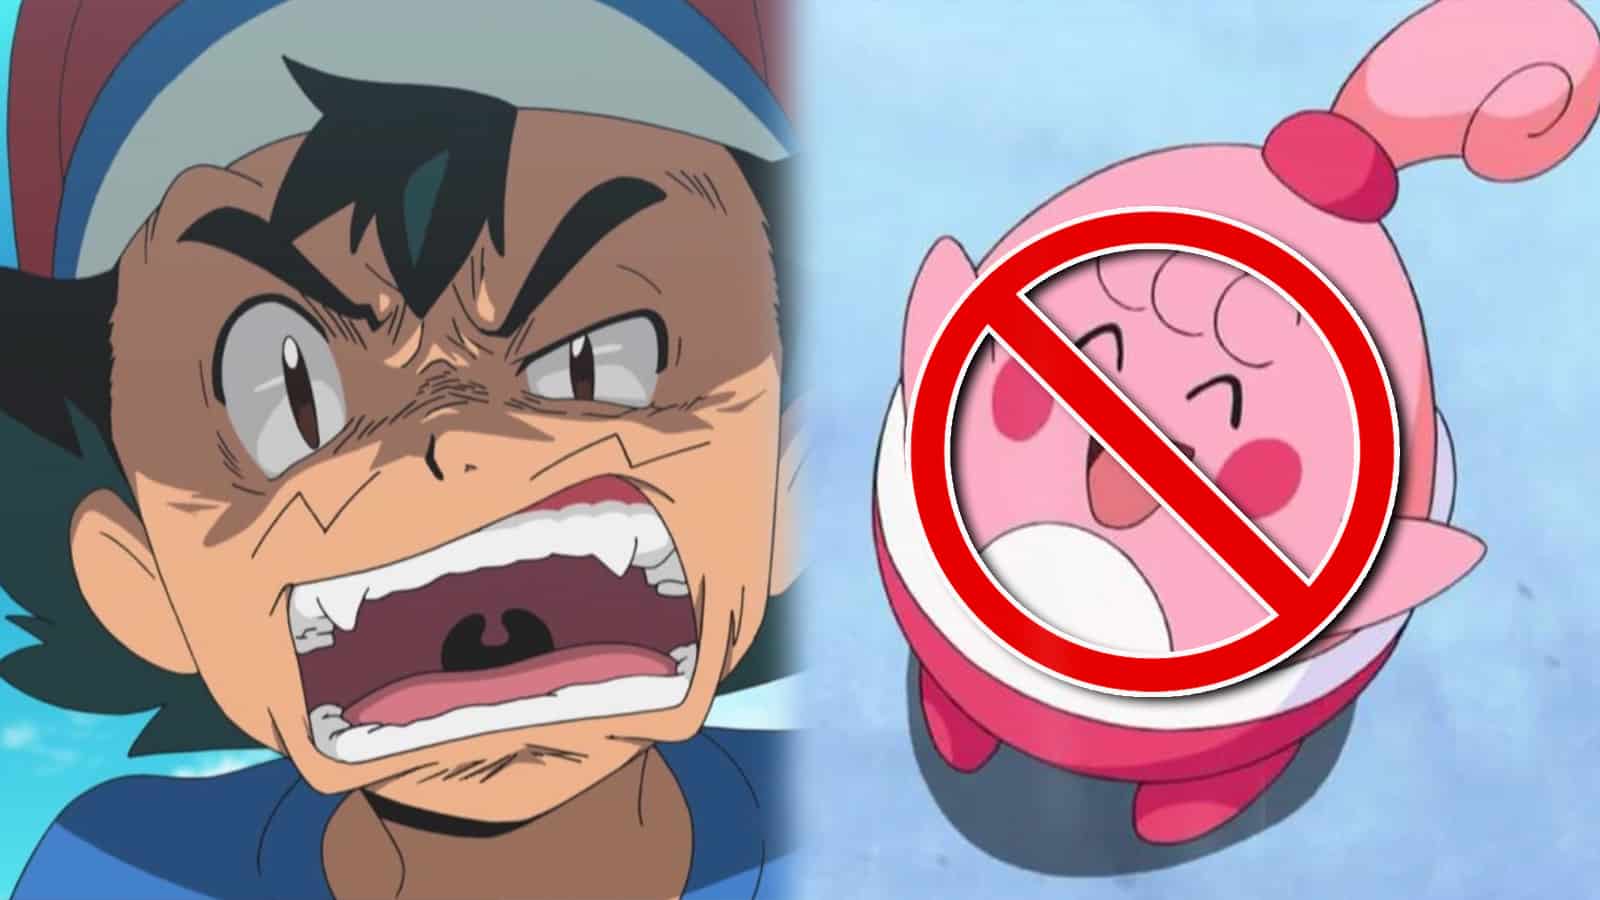 Angry Ash Ketchum next Happing from Pokemon anime